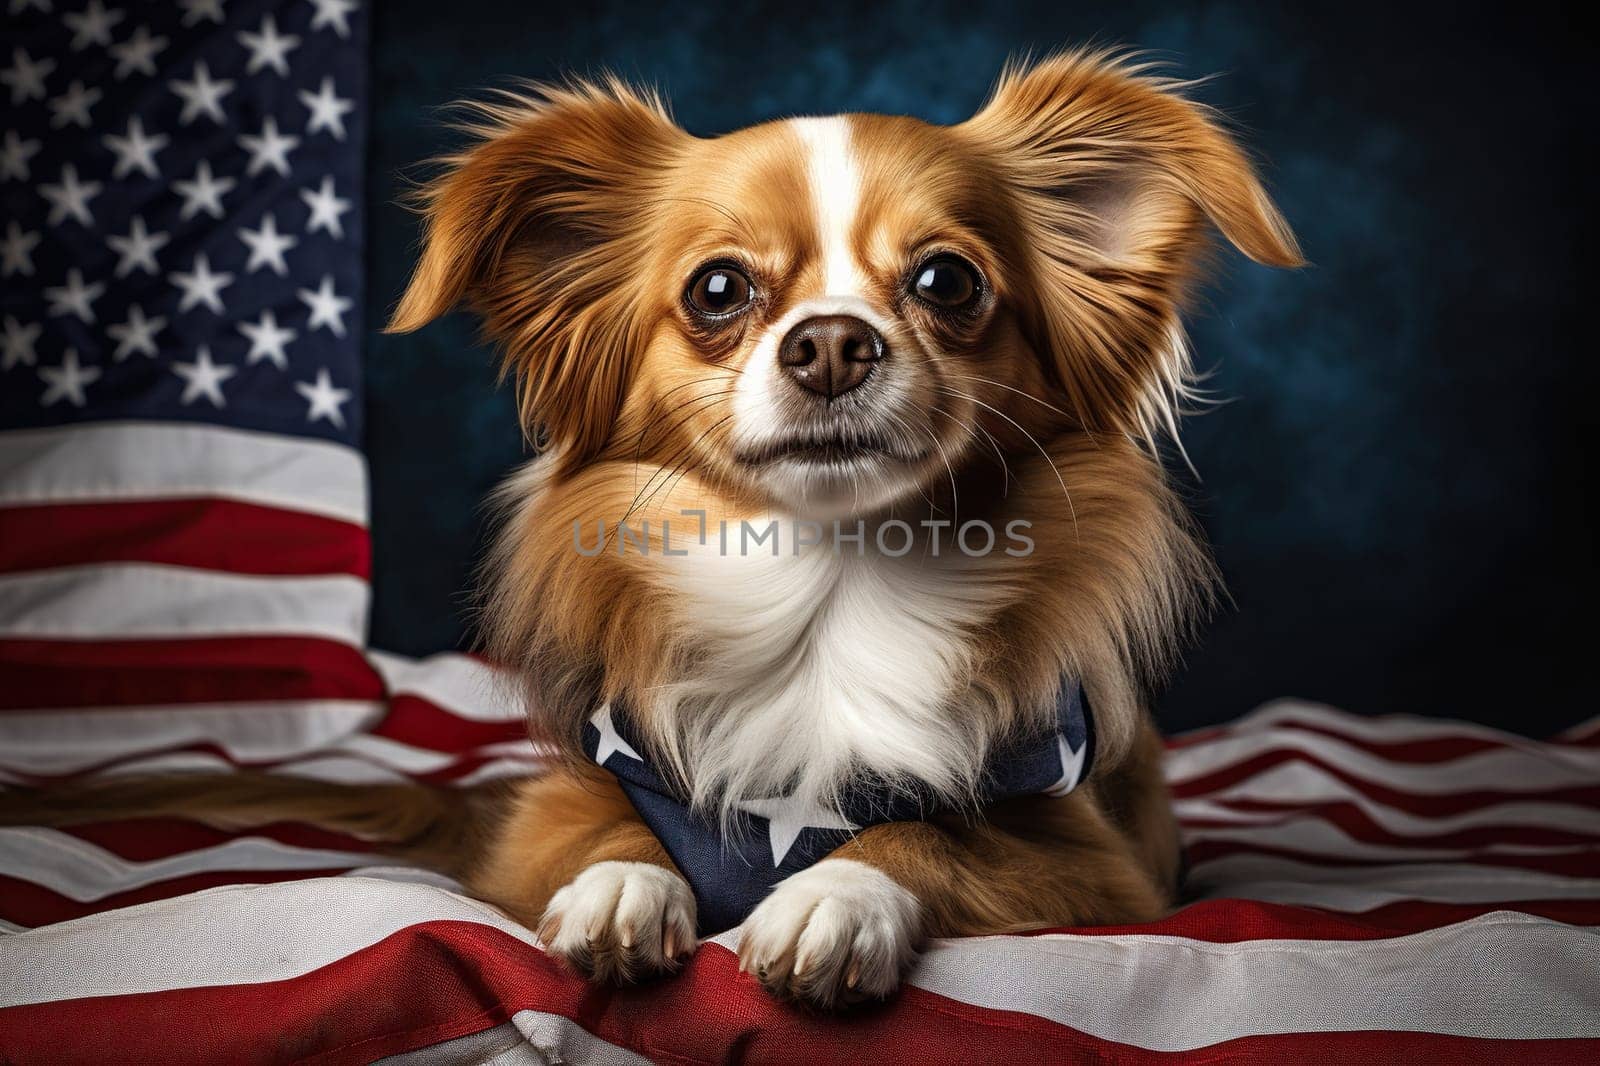 A Chihuahua dog lies against the background of the US flag.